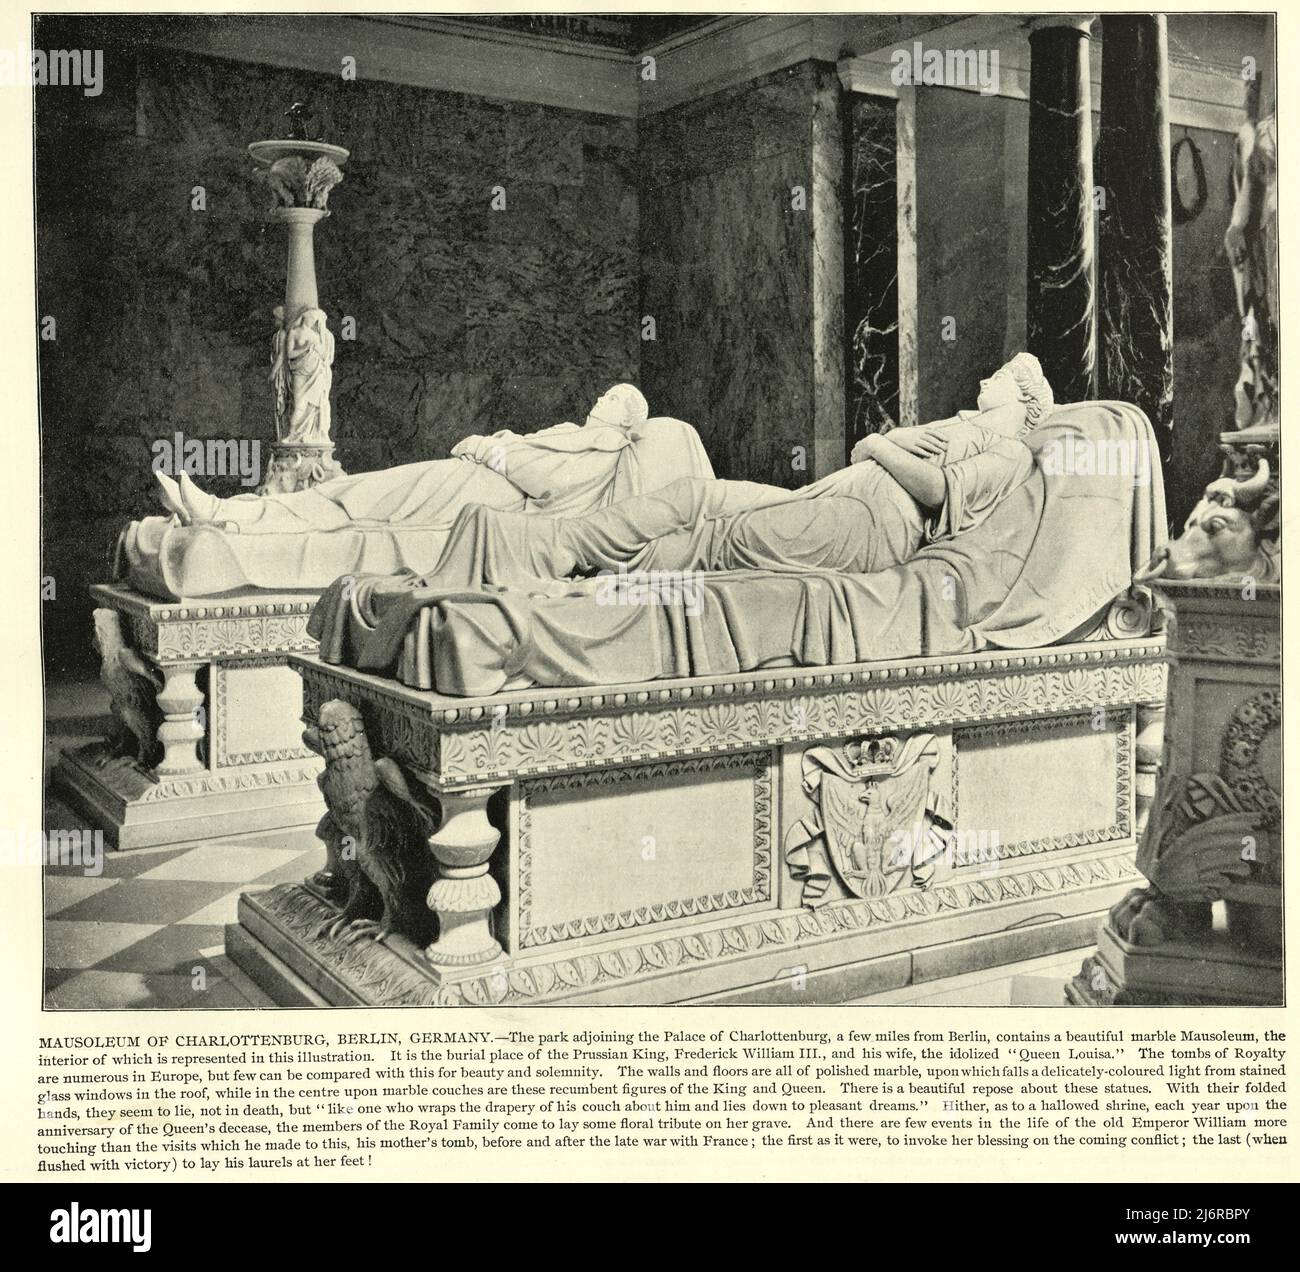 Vintage photograph of Mausoleum of Charlottenburg, Berlin, Germany and the tombs of Frederick William III of Prussia and Louise of Mecklenburg-Strelitz Stock Photo